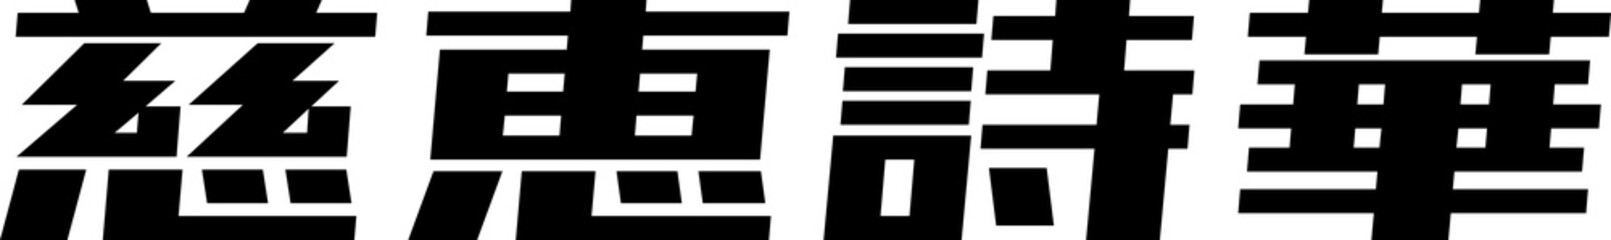 Name "Jessica" in Kanji Characters (Phonetic transcription, approximation)